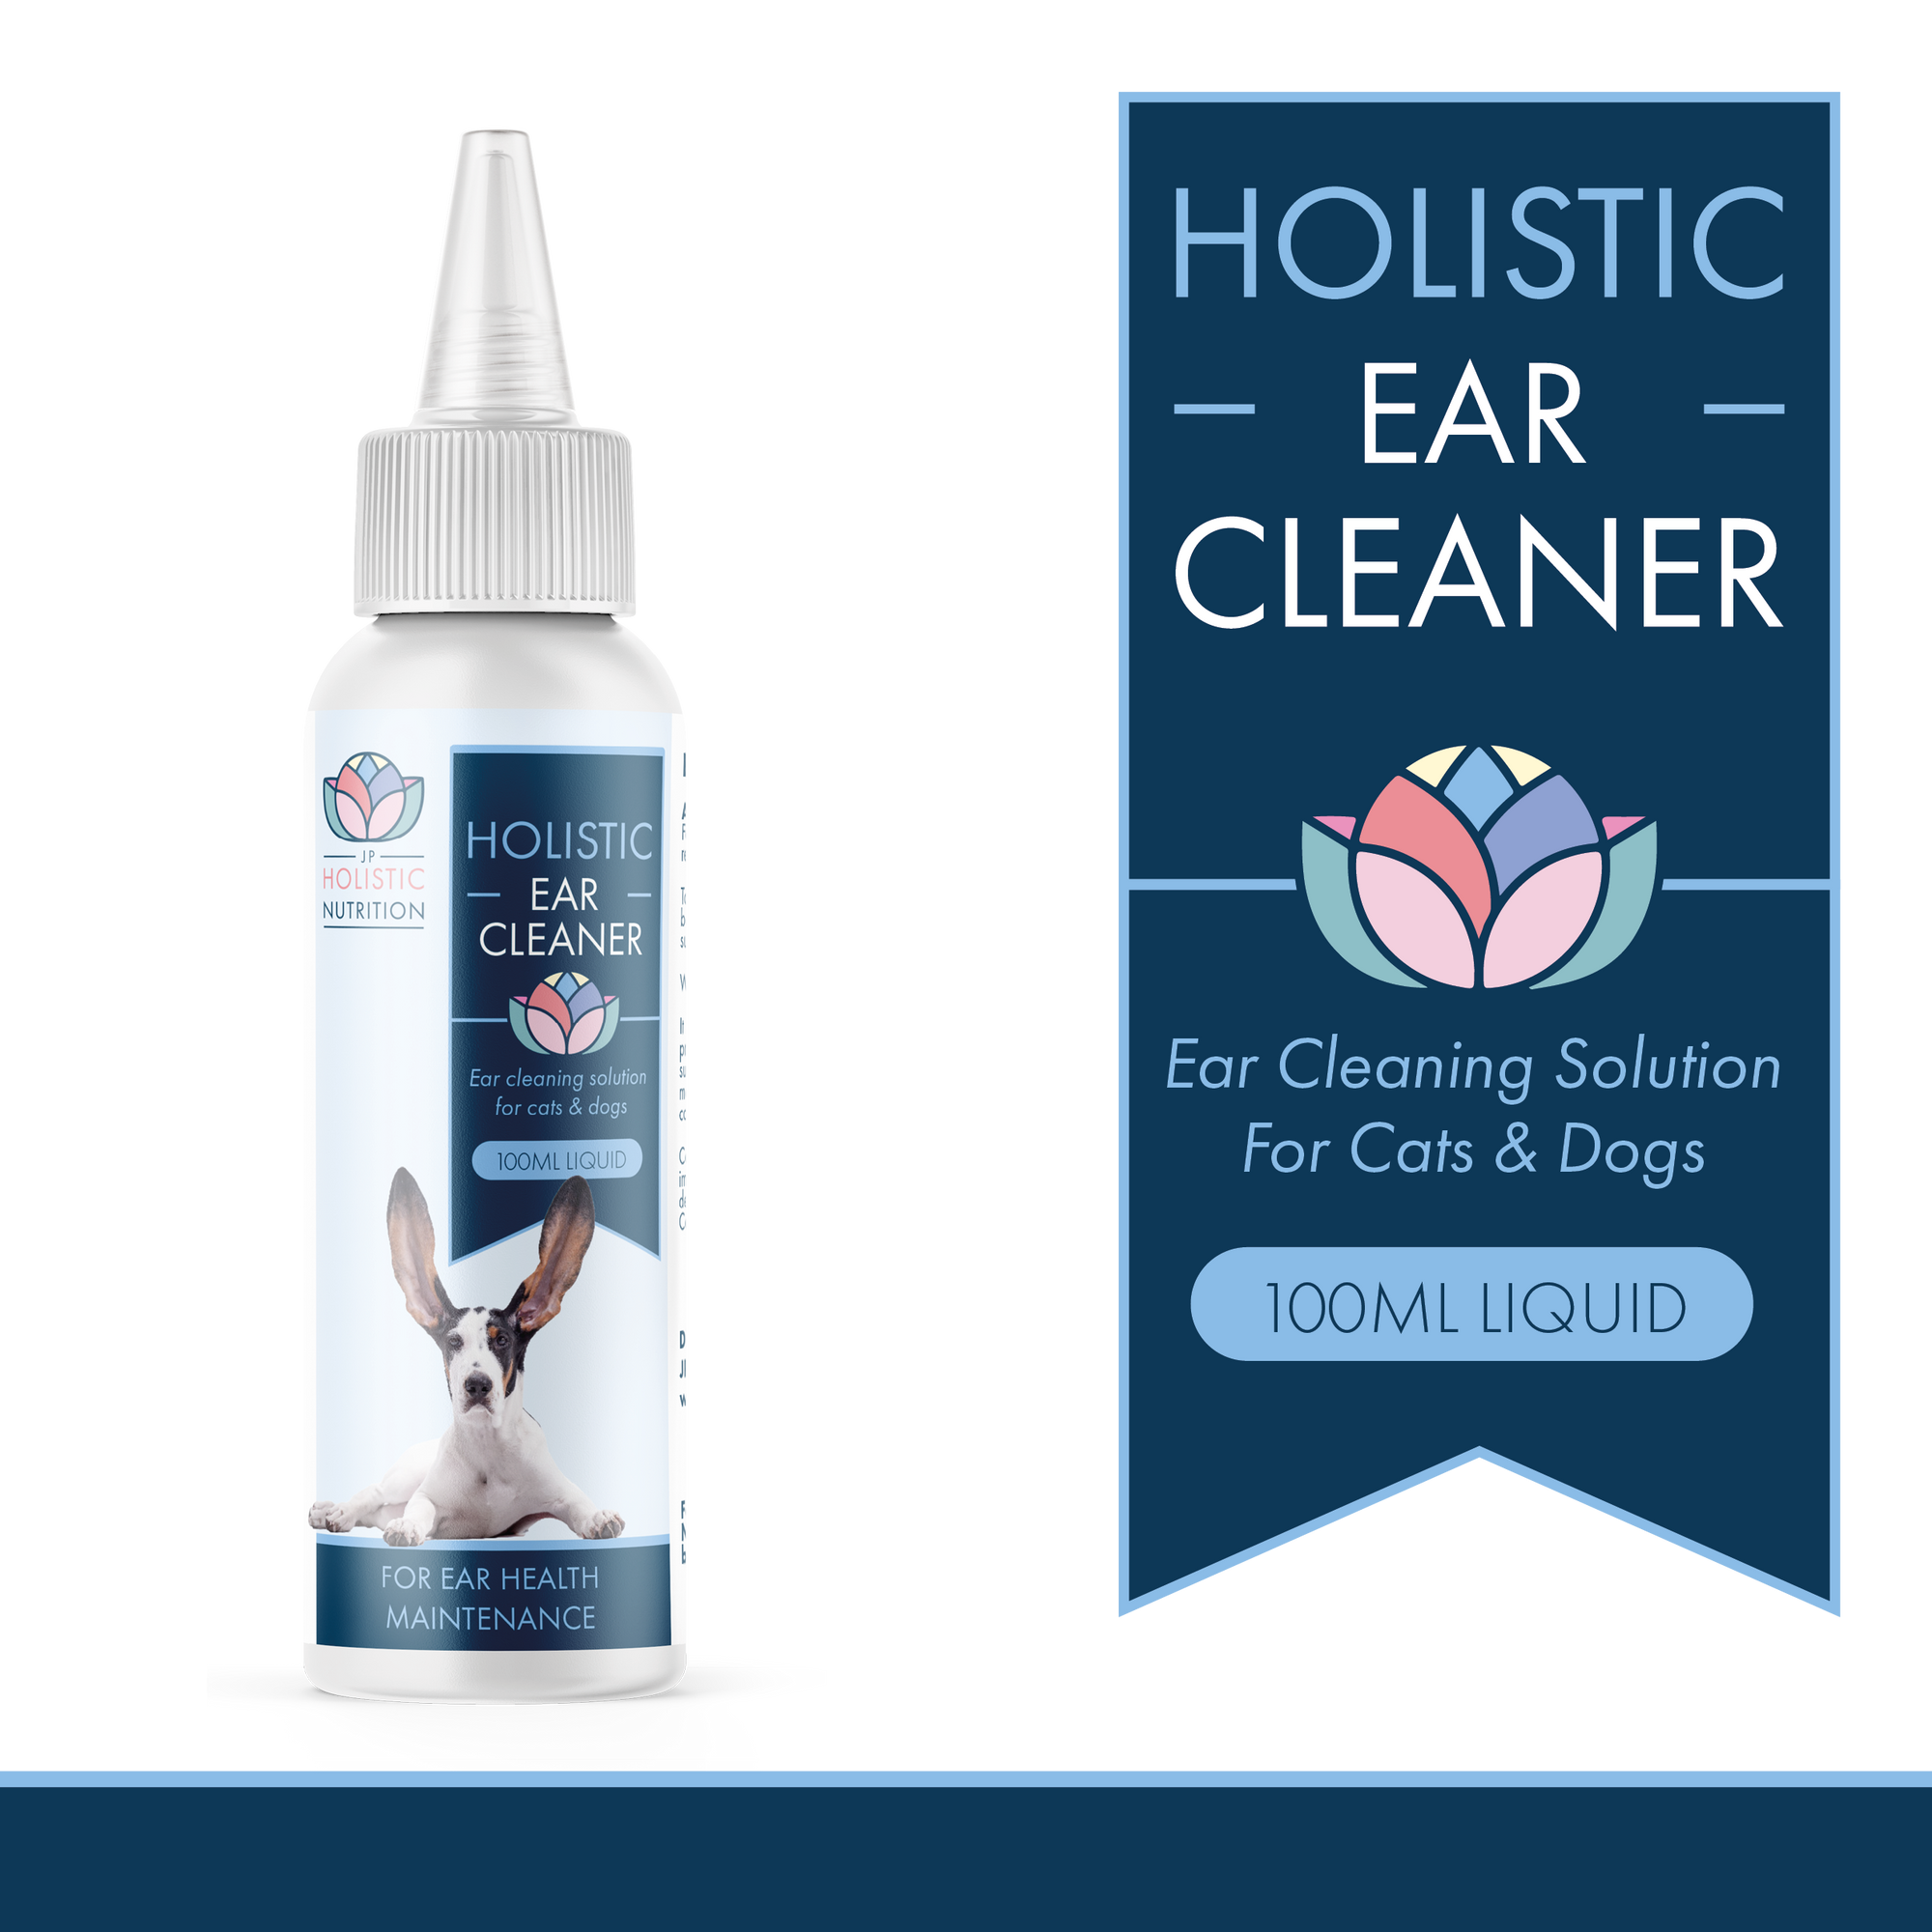 Natural ear cleaner for dogs and cats